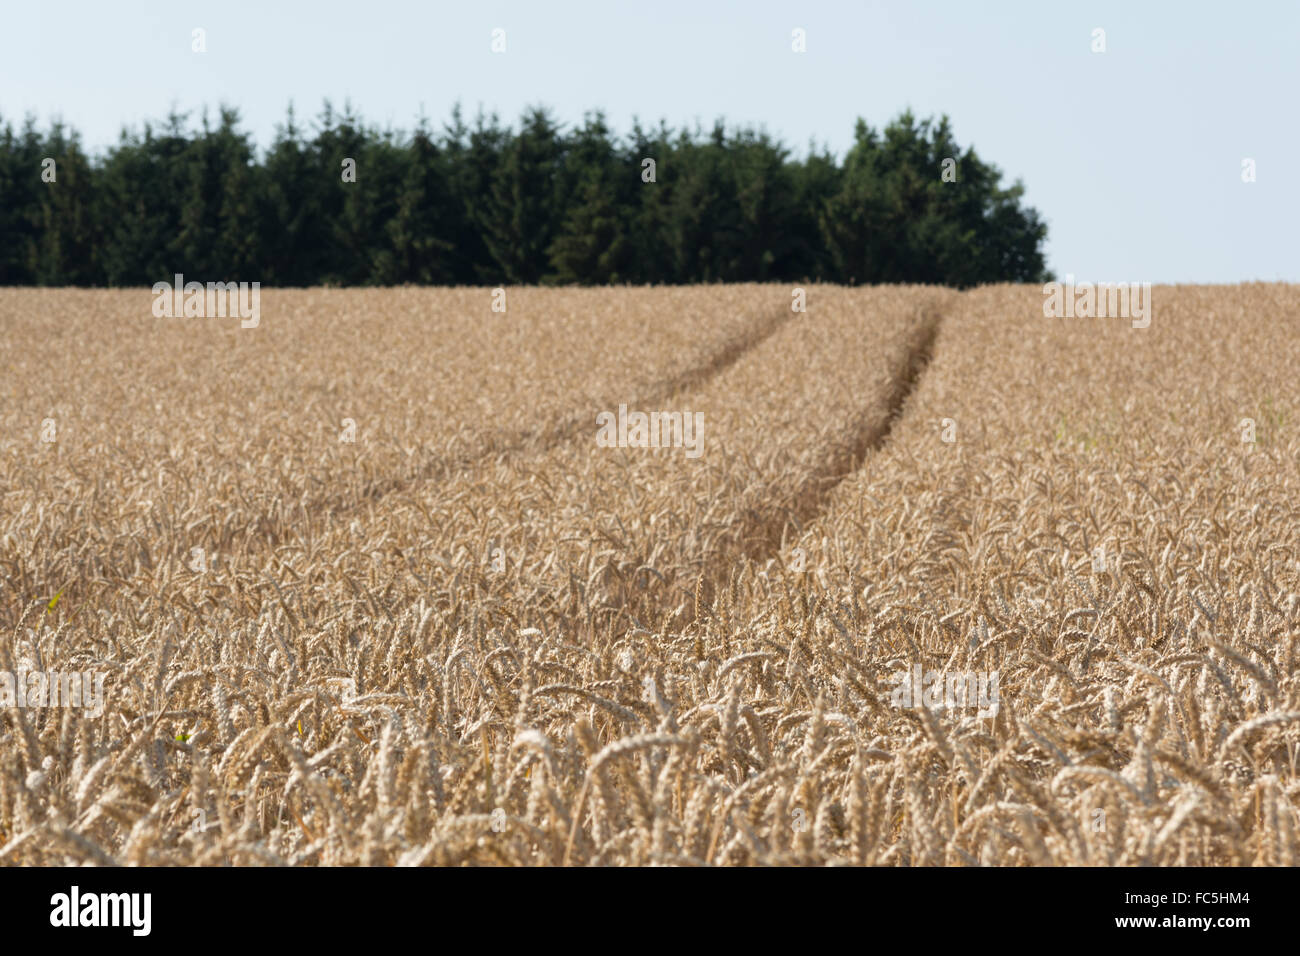 Tractor tracks in the middle by Cornfield Stock Photo